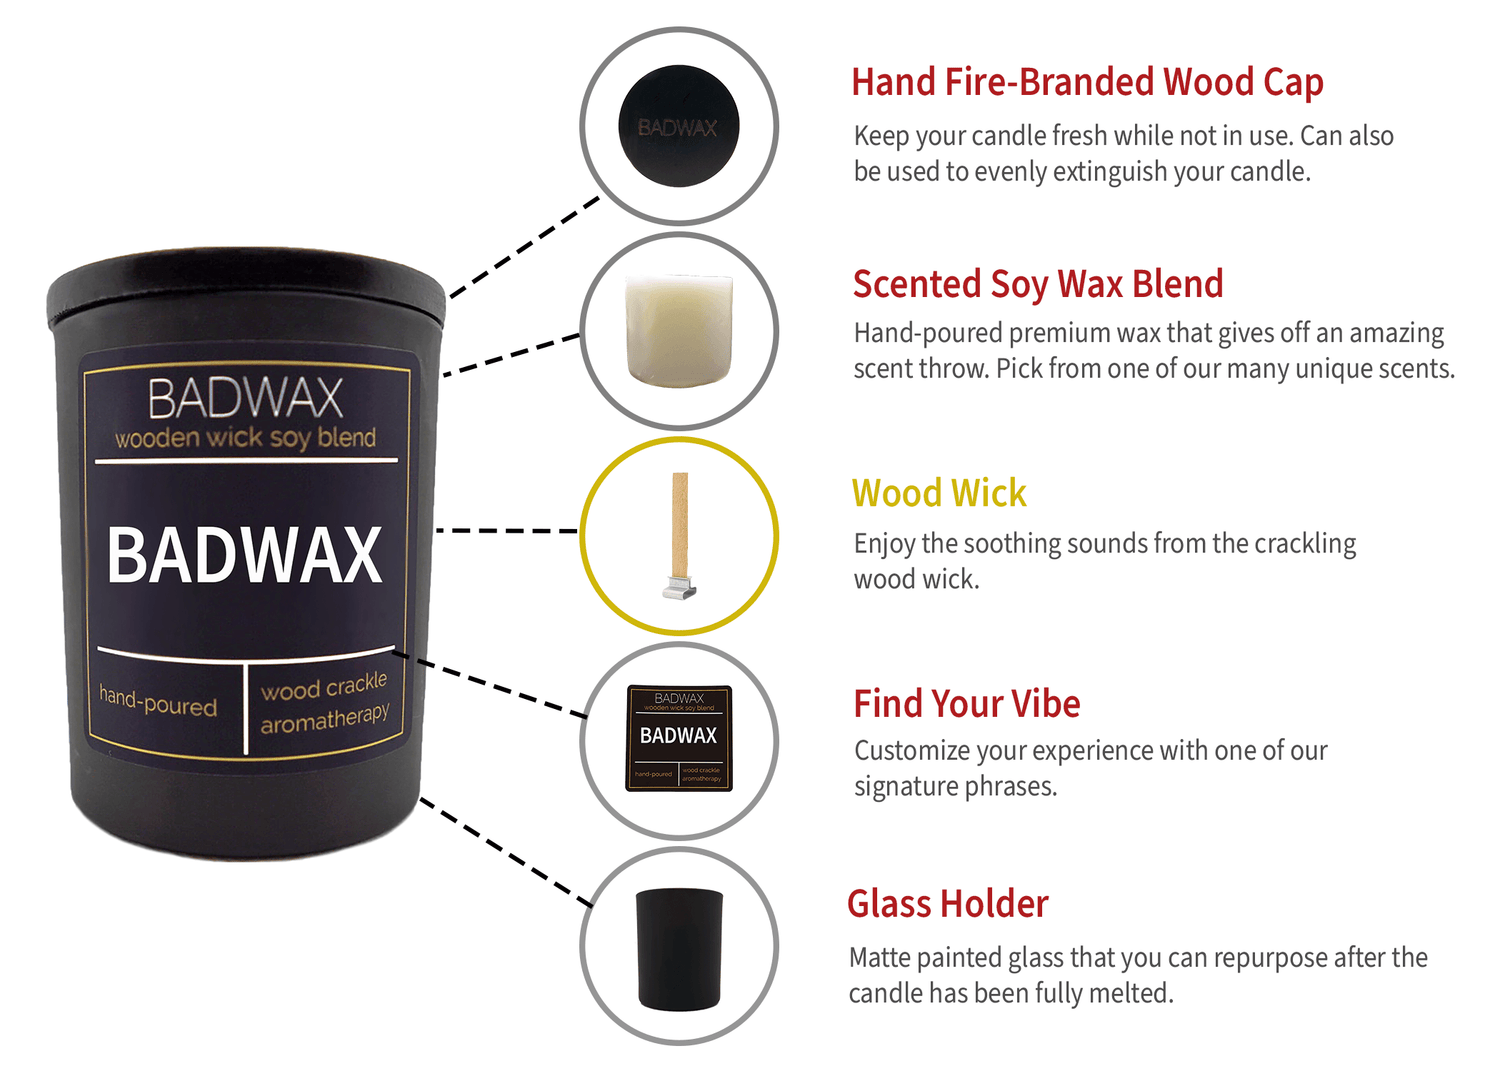 Woodwick Candles  Best Crackling Wood Wick Candles - WoodWick